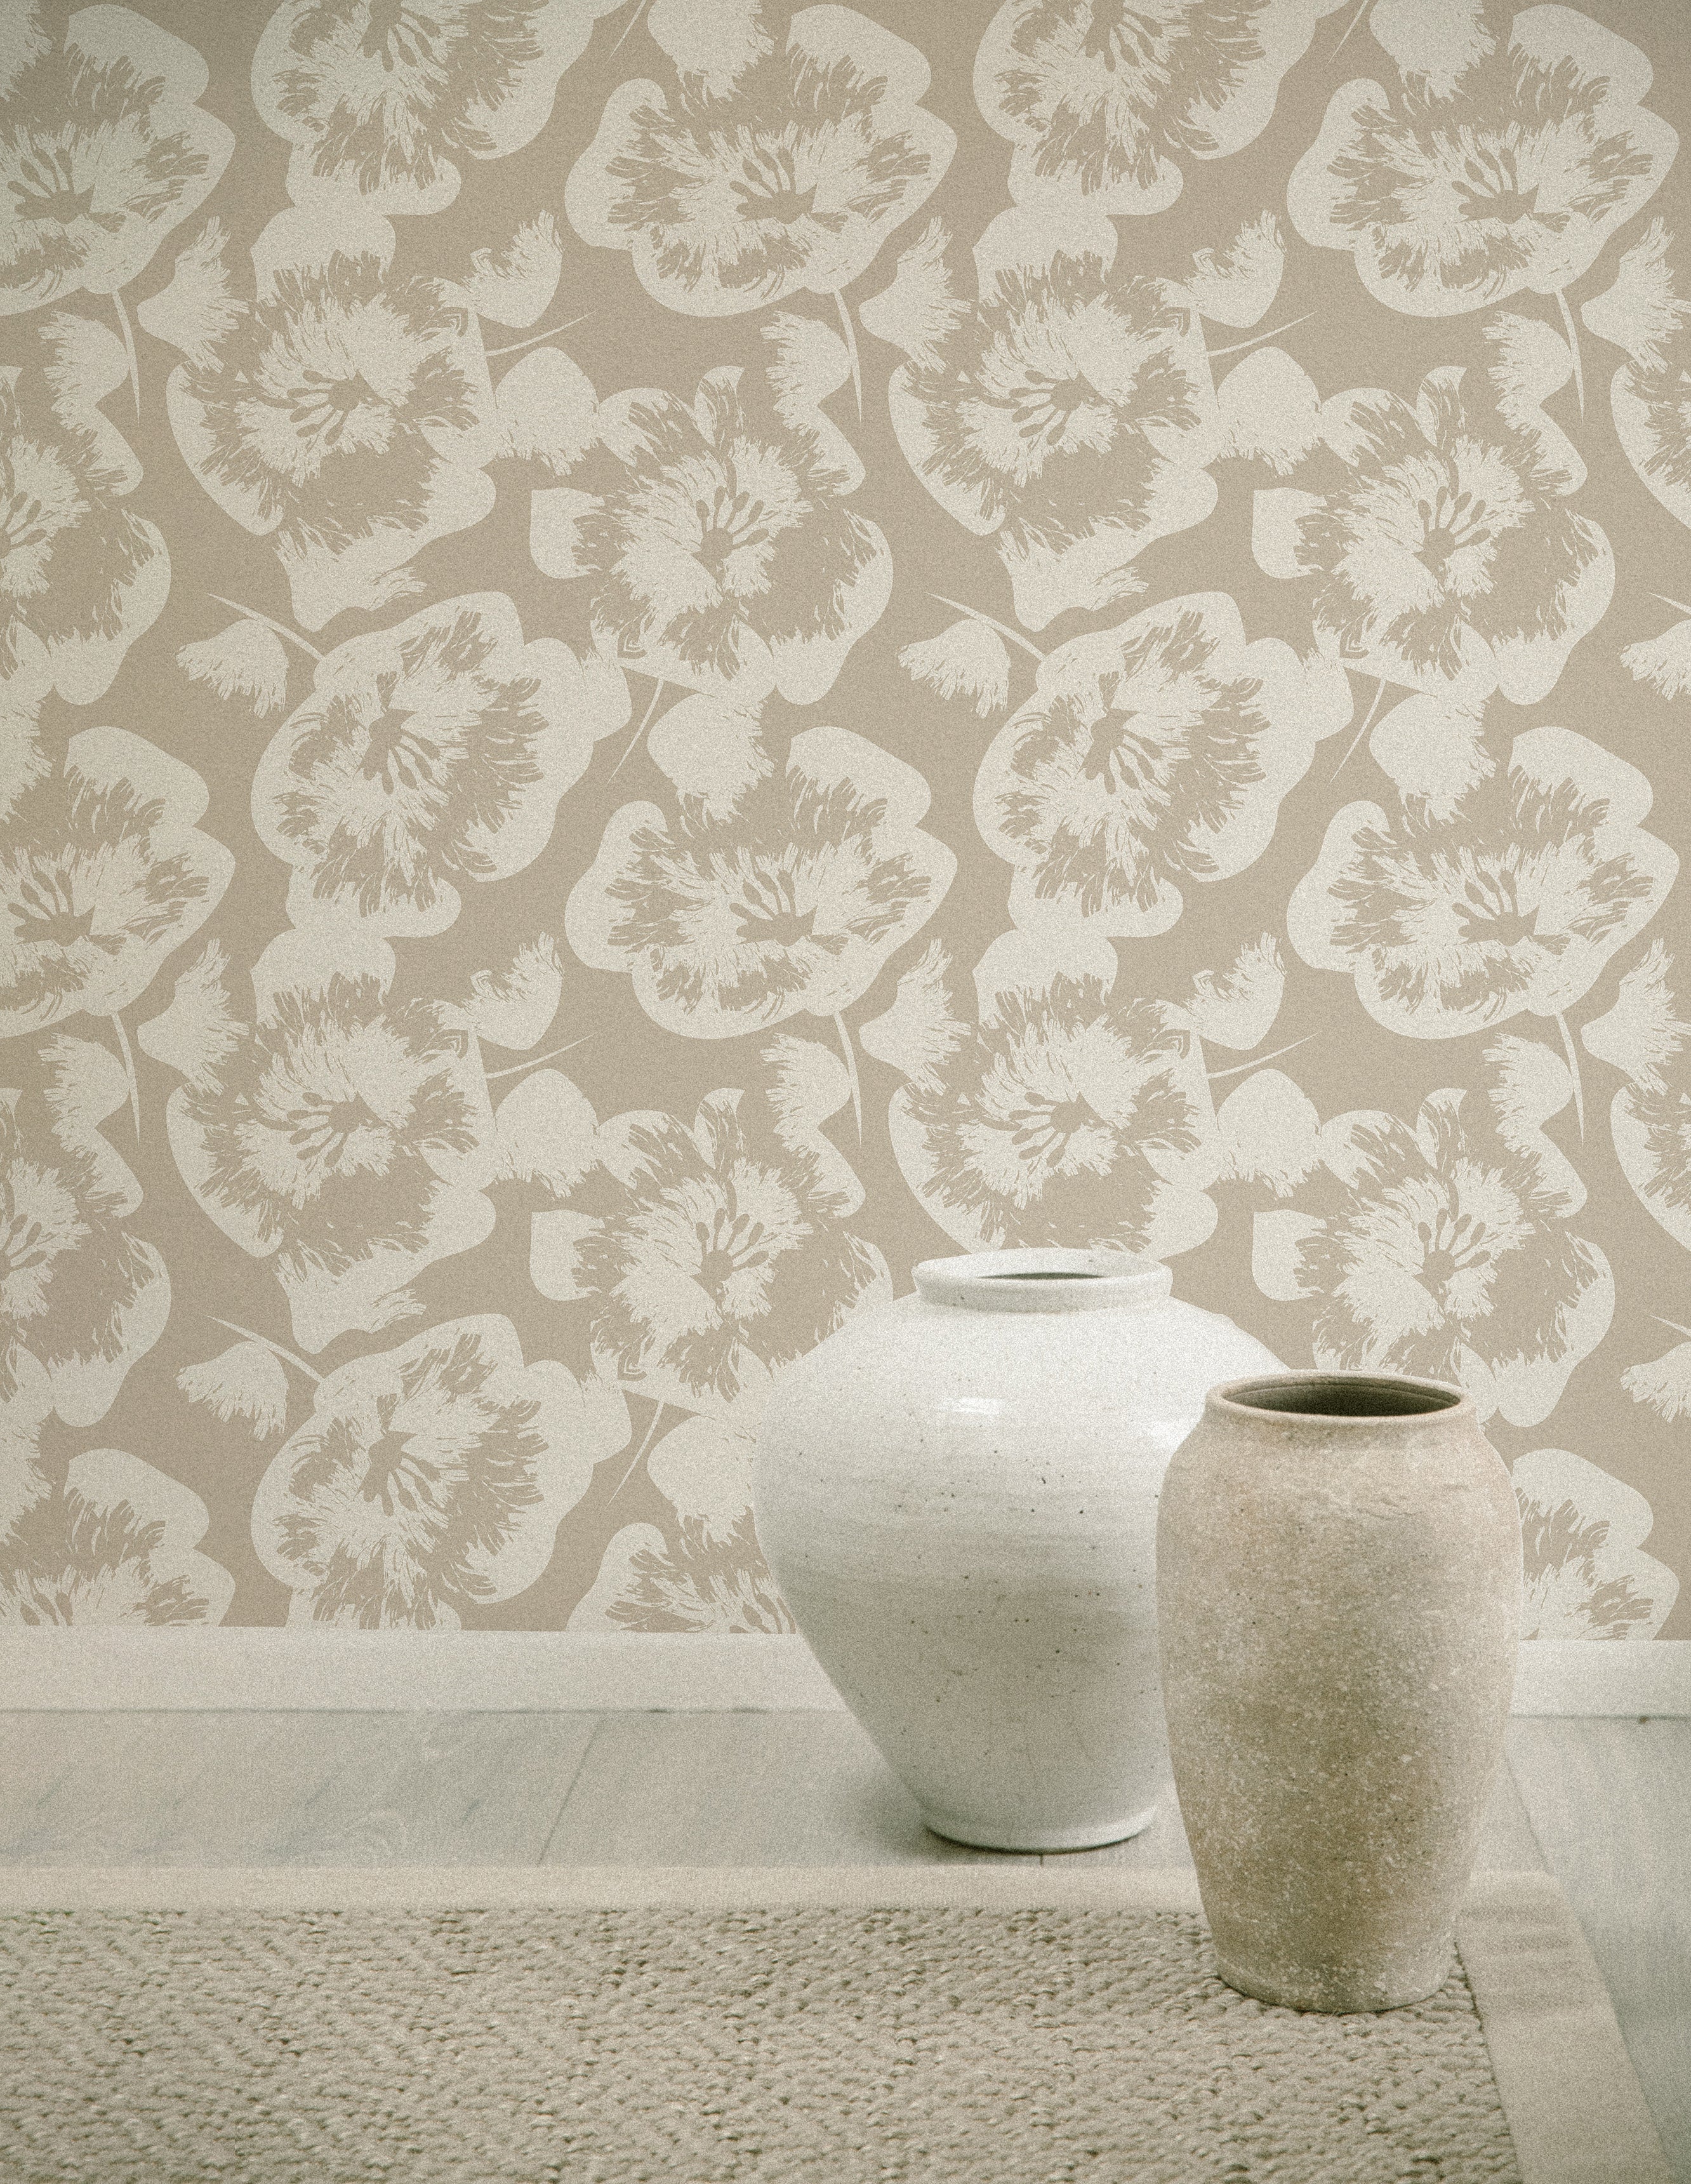 A contemporary room featuring Stamped Floral Wallpaper, with large beige flowers on a lighter background creating a bold yet elegant pattern. The decor includes two textured ceramic vases on a wooden floor, complementing the wallpaper's organic aesthetic